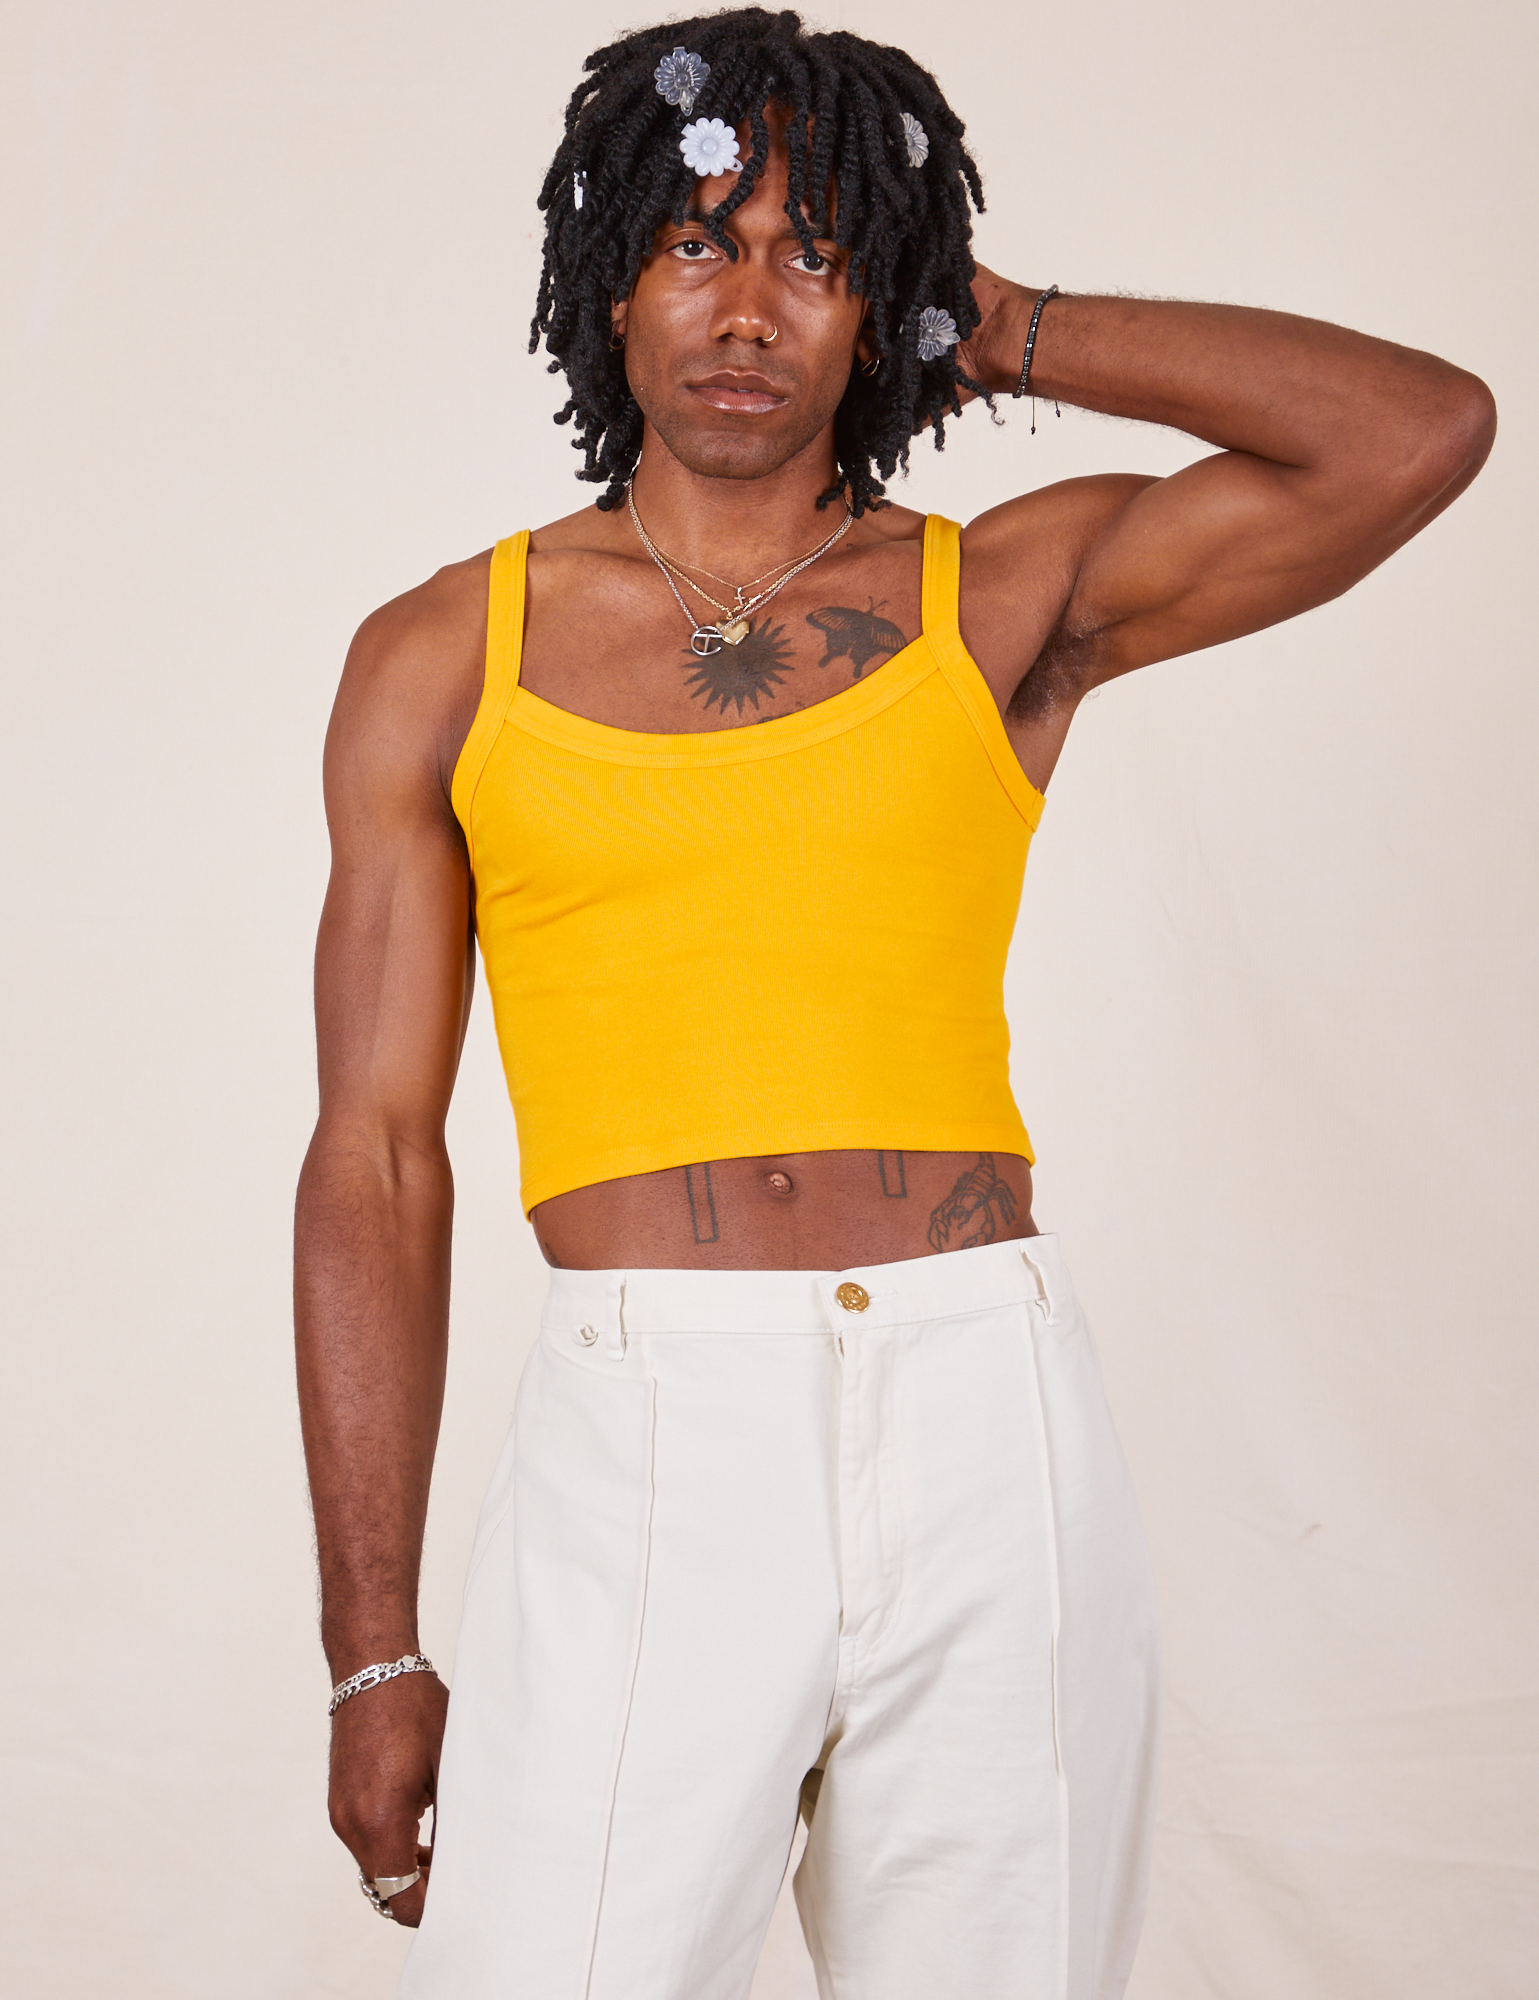 Jerrod is 6'3" and wearing S Cropped Cami in Sunshine Yellow paired with vintage tee off-white Western Pants